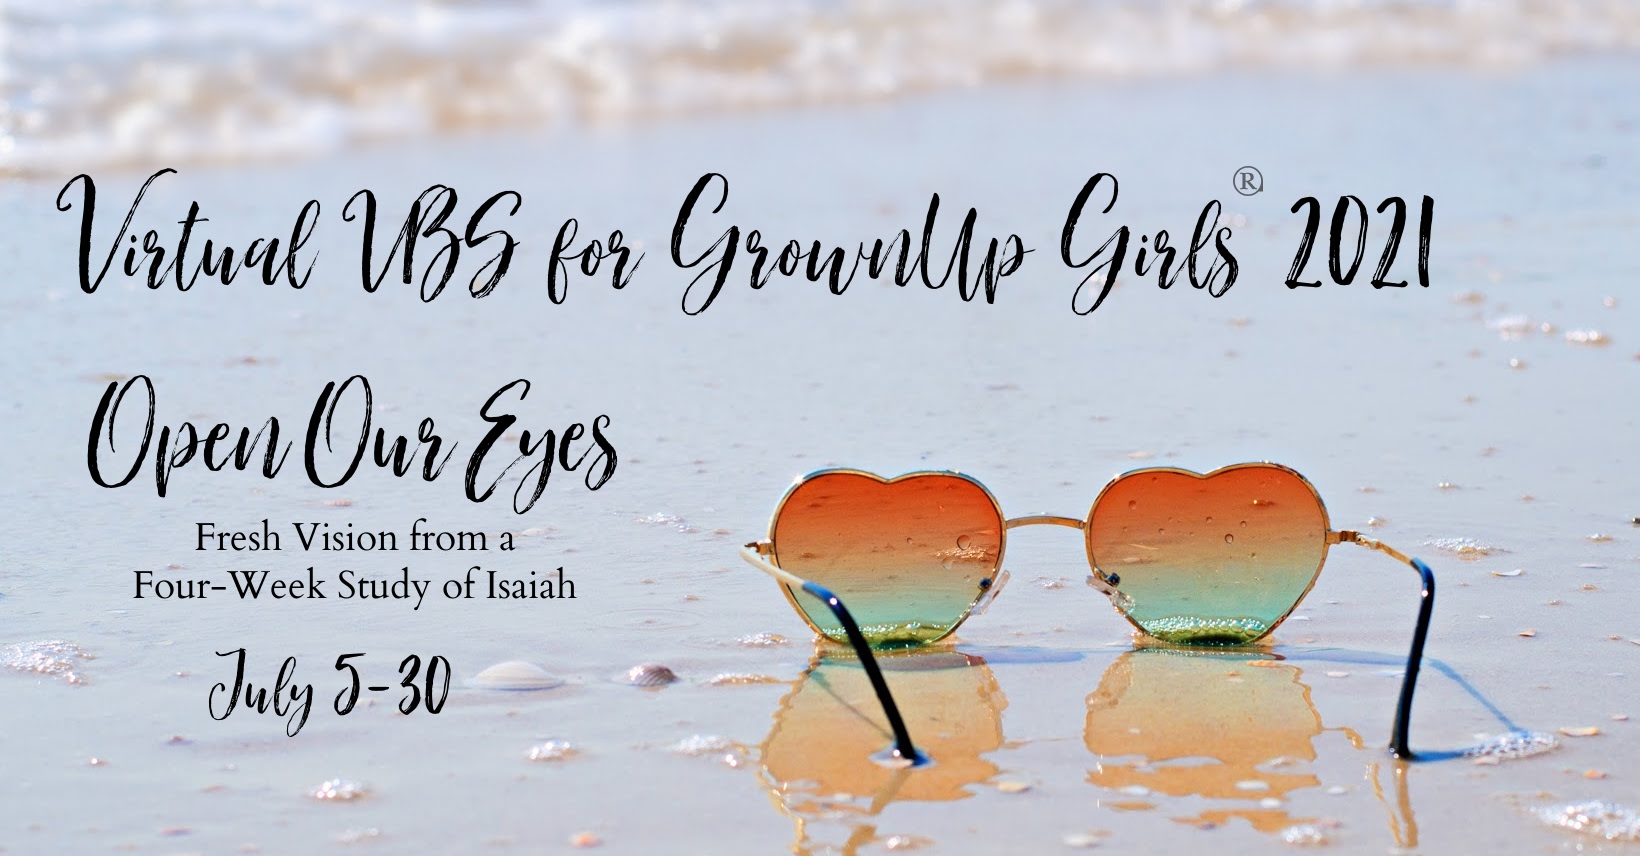 Virtual VBS for GrownUp Girls® 2021